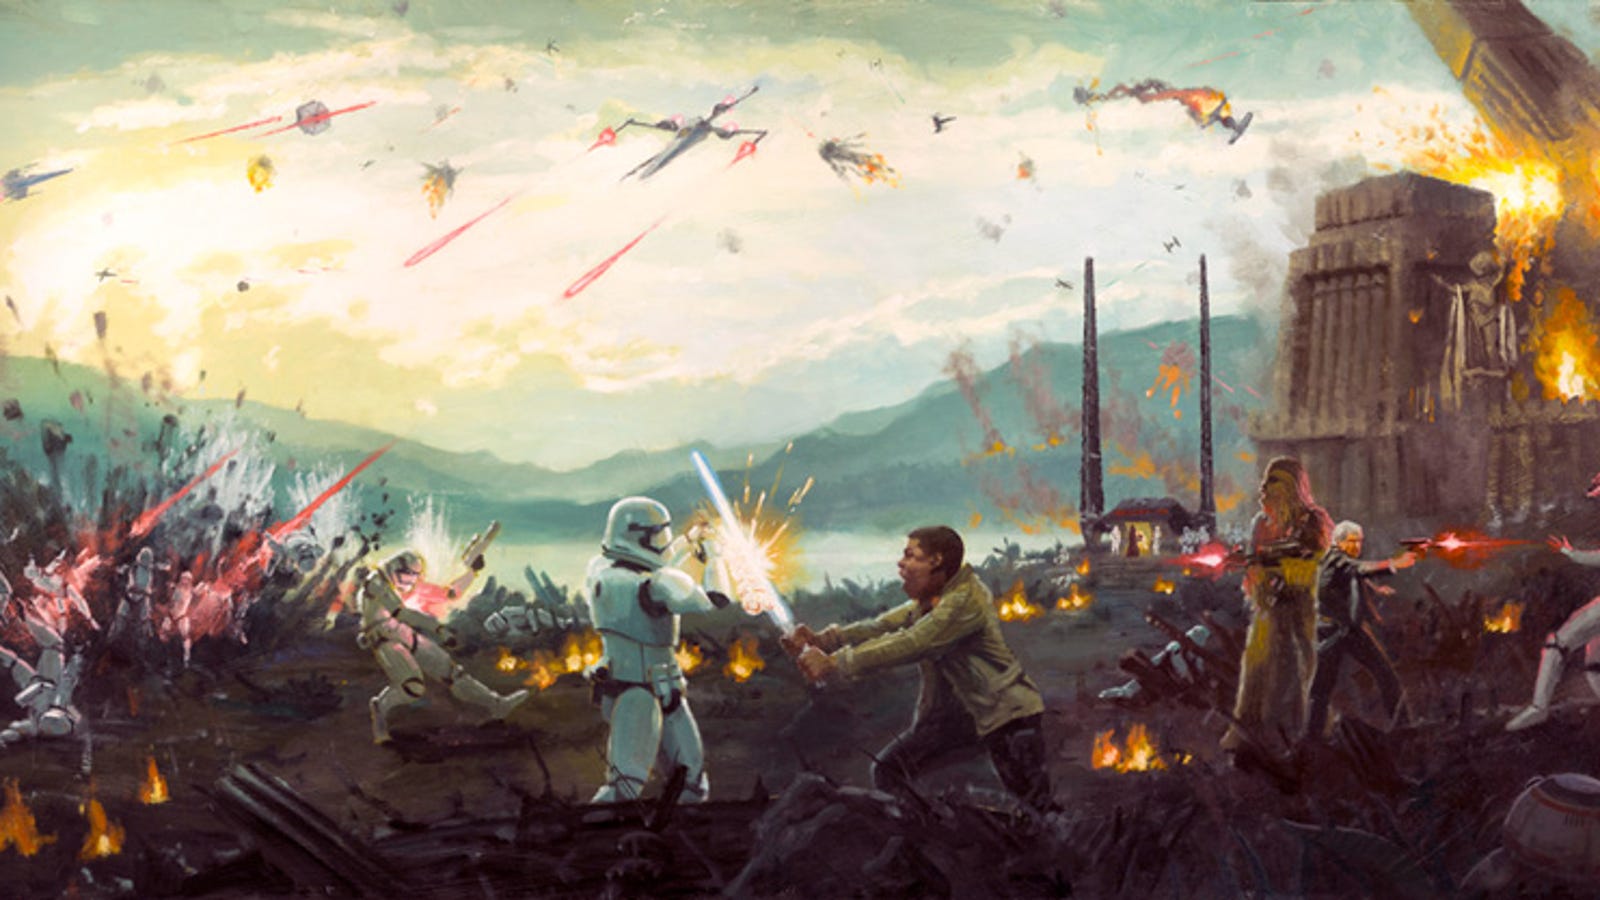 Star Wars example #291: Finn Takes on TR-8R in This Insane Force Awakens Art, Part of a Batch of New Star Wars Pieces